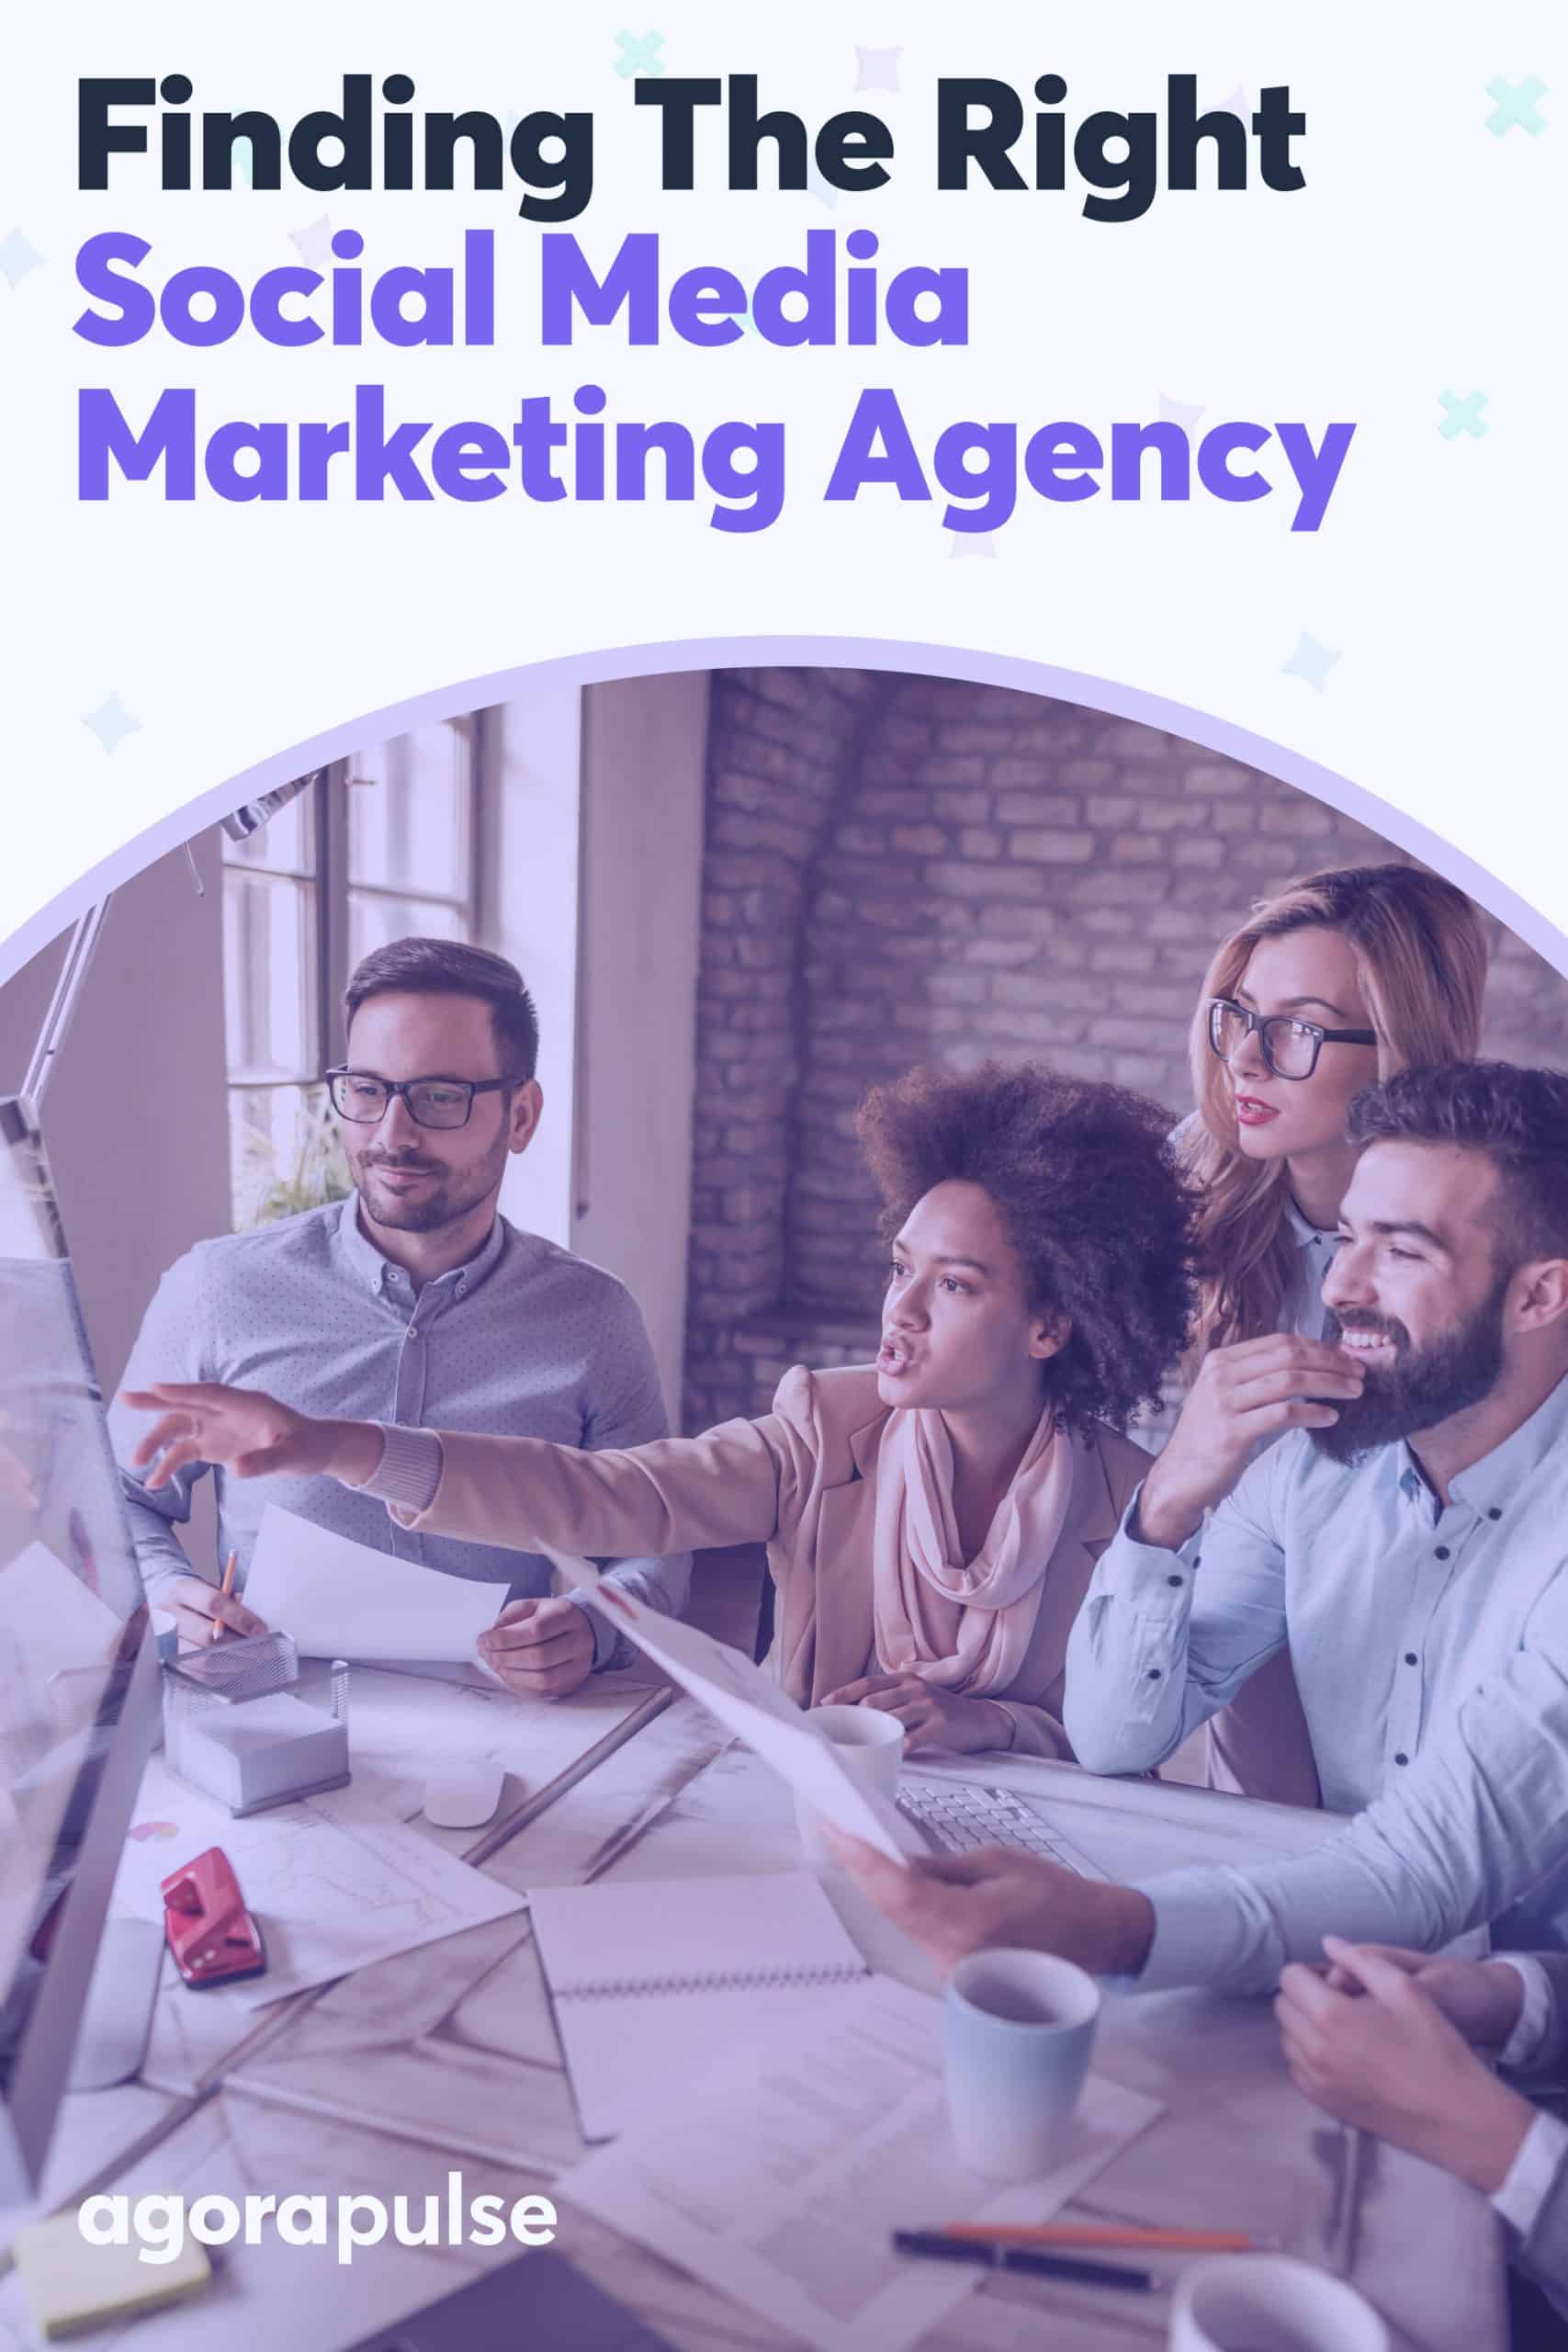 How to Choose the Right Social Media Marketing Agency For Your Brand